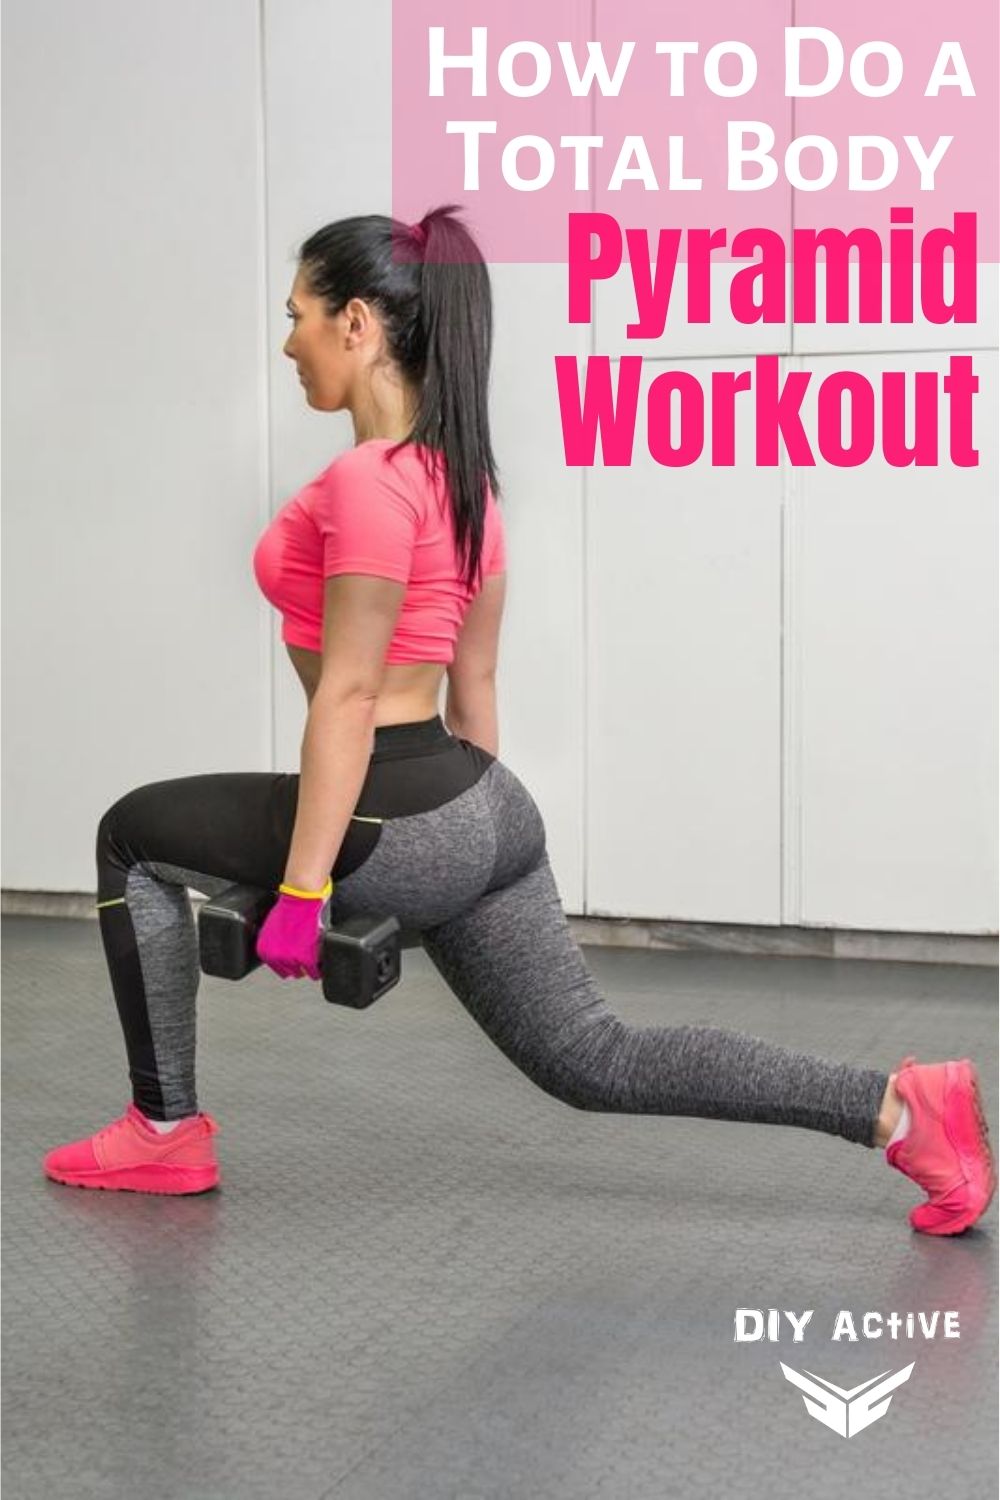 How to Do a Total Body Pyramid Workout